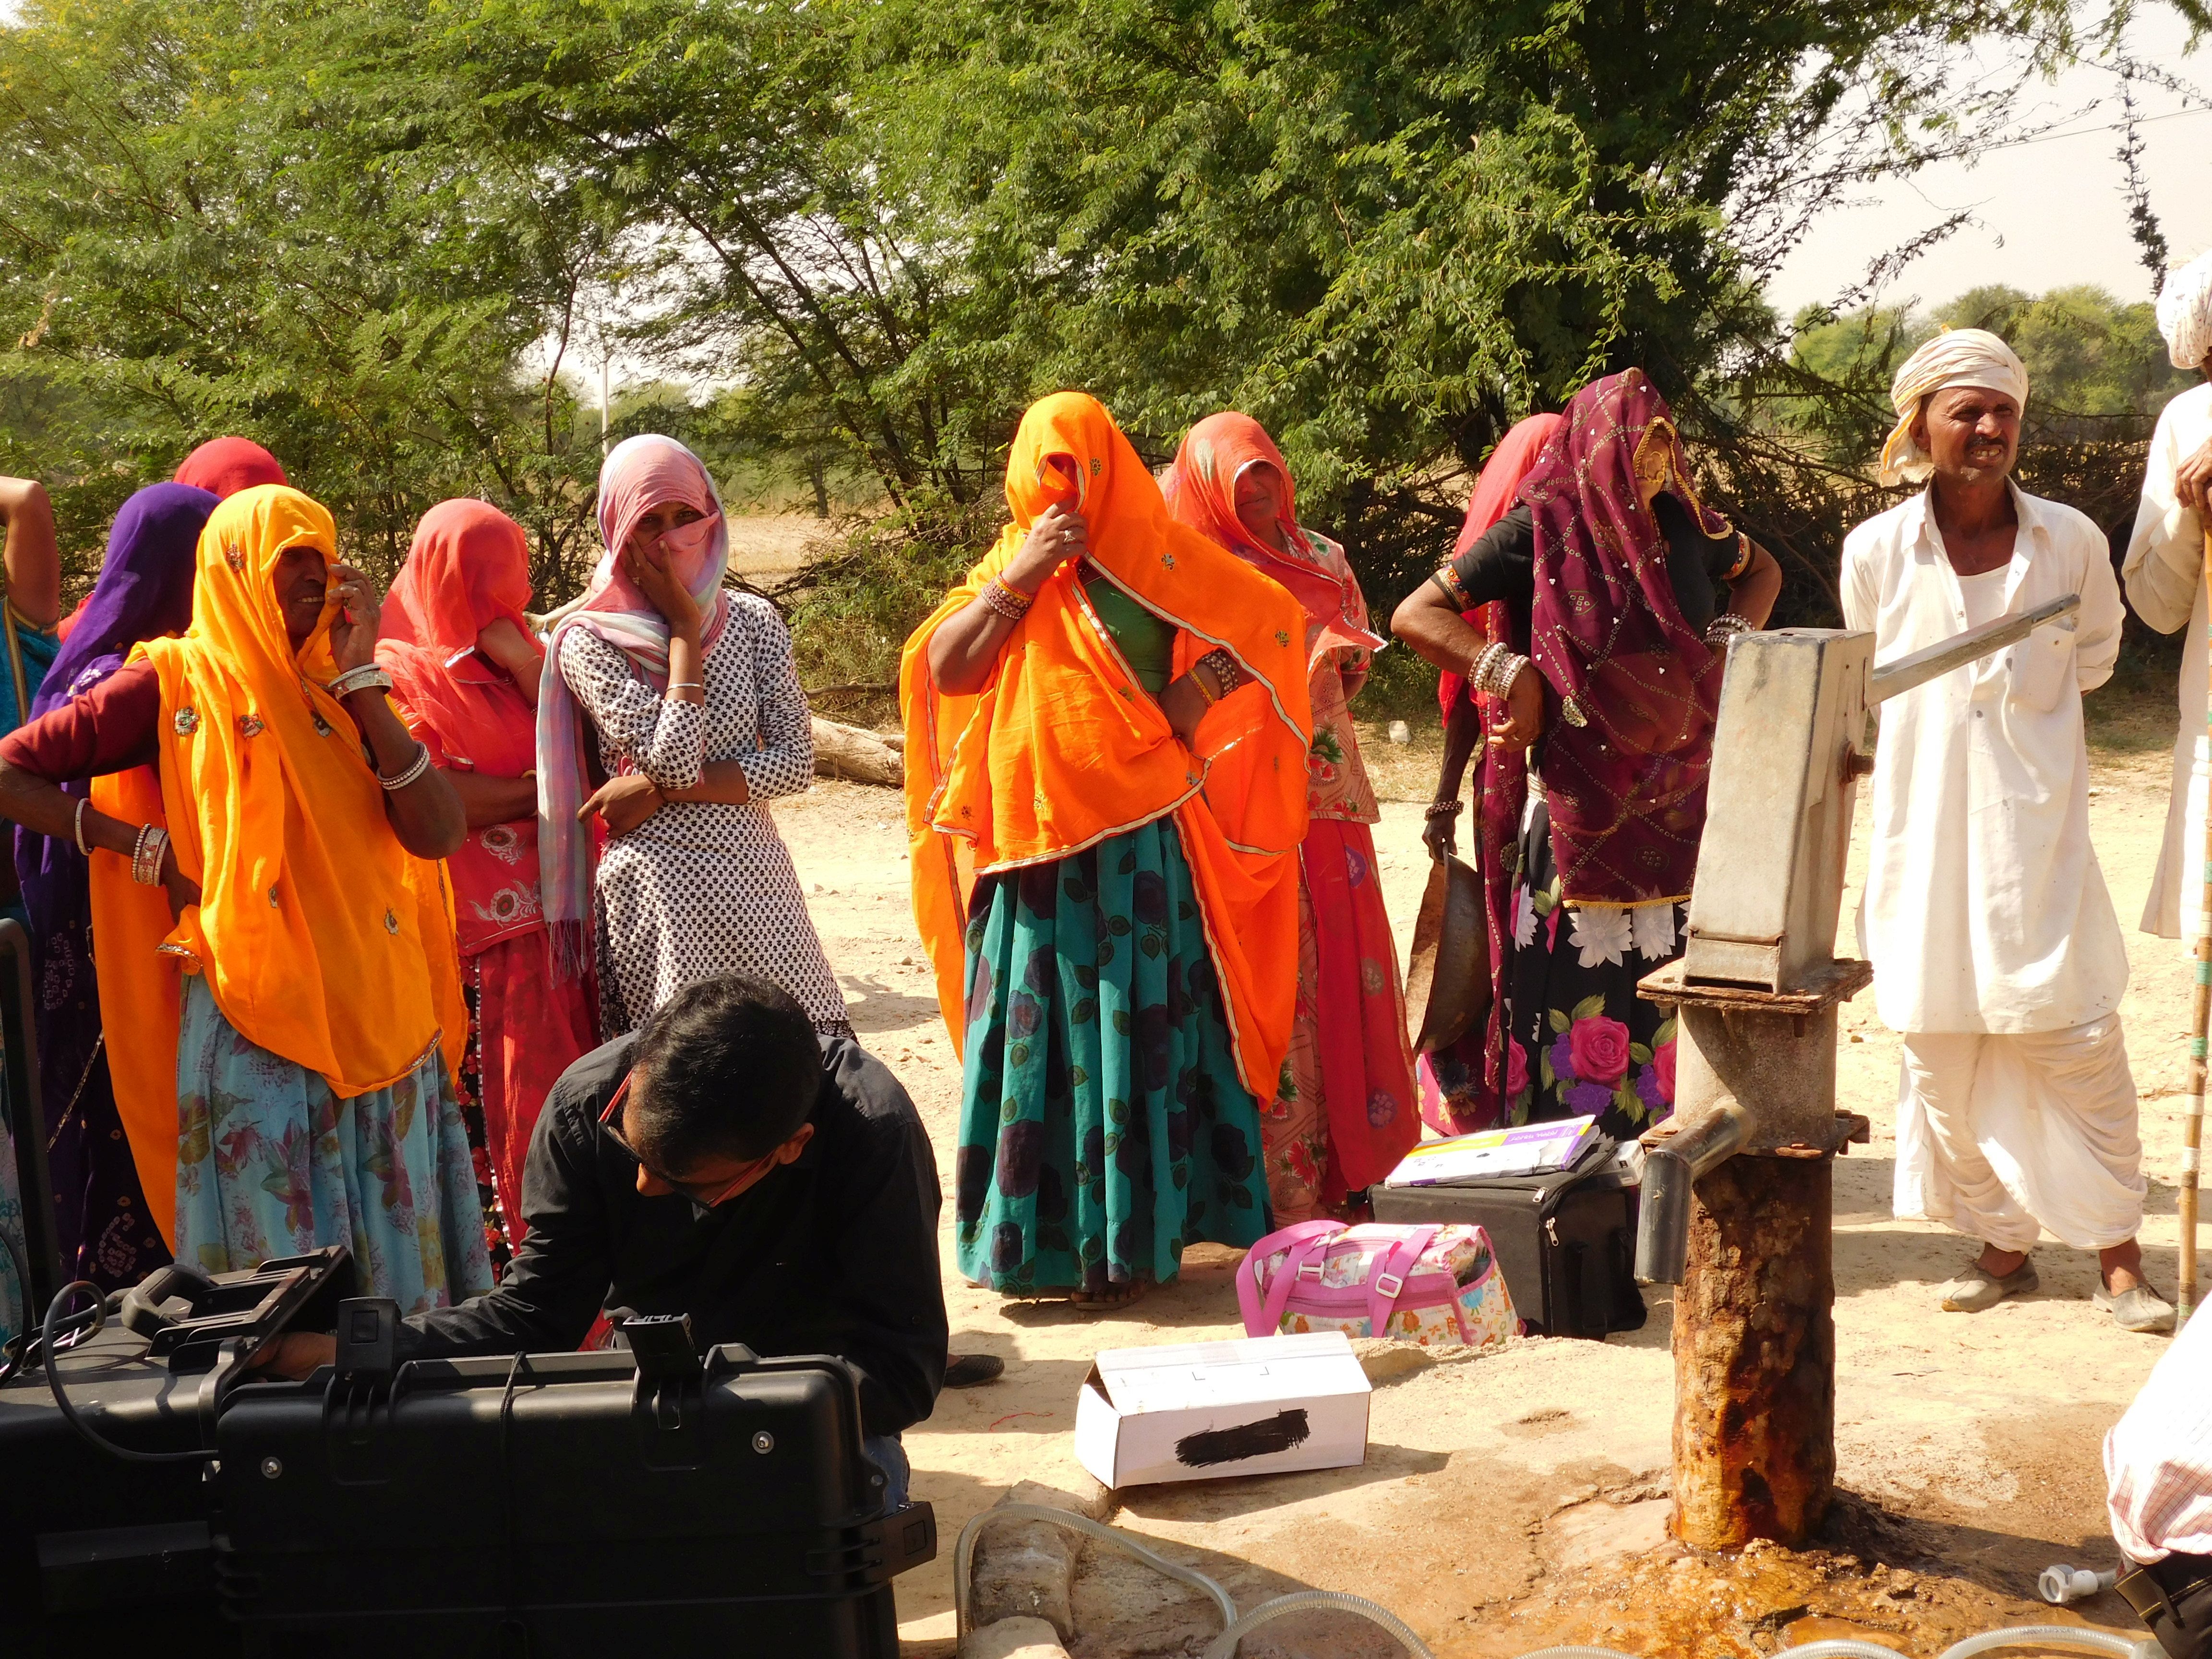 The villagers took help from Prayatna Sansthan to access clean drinking water.